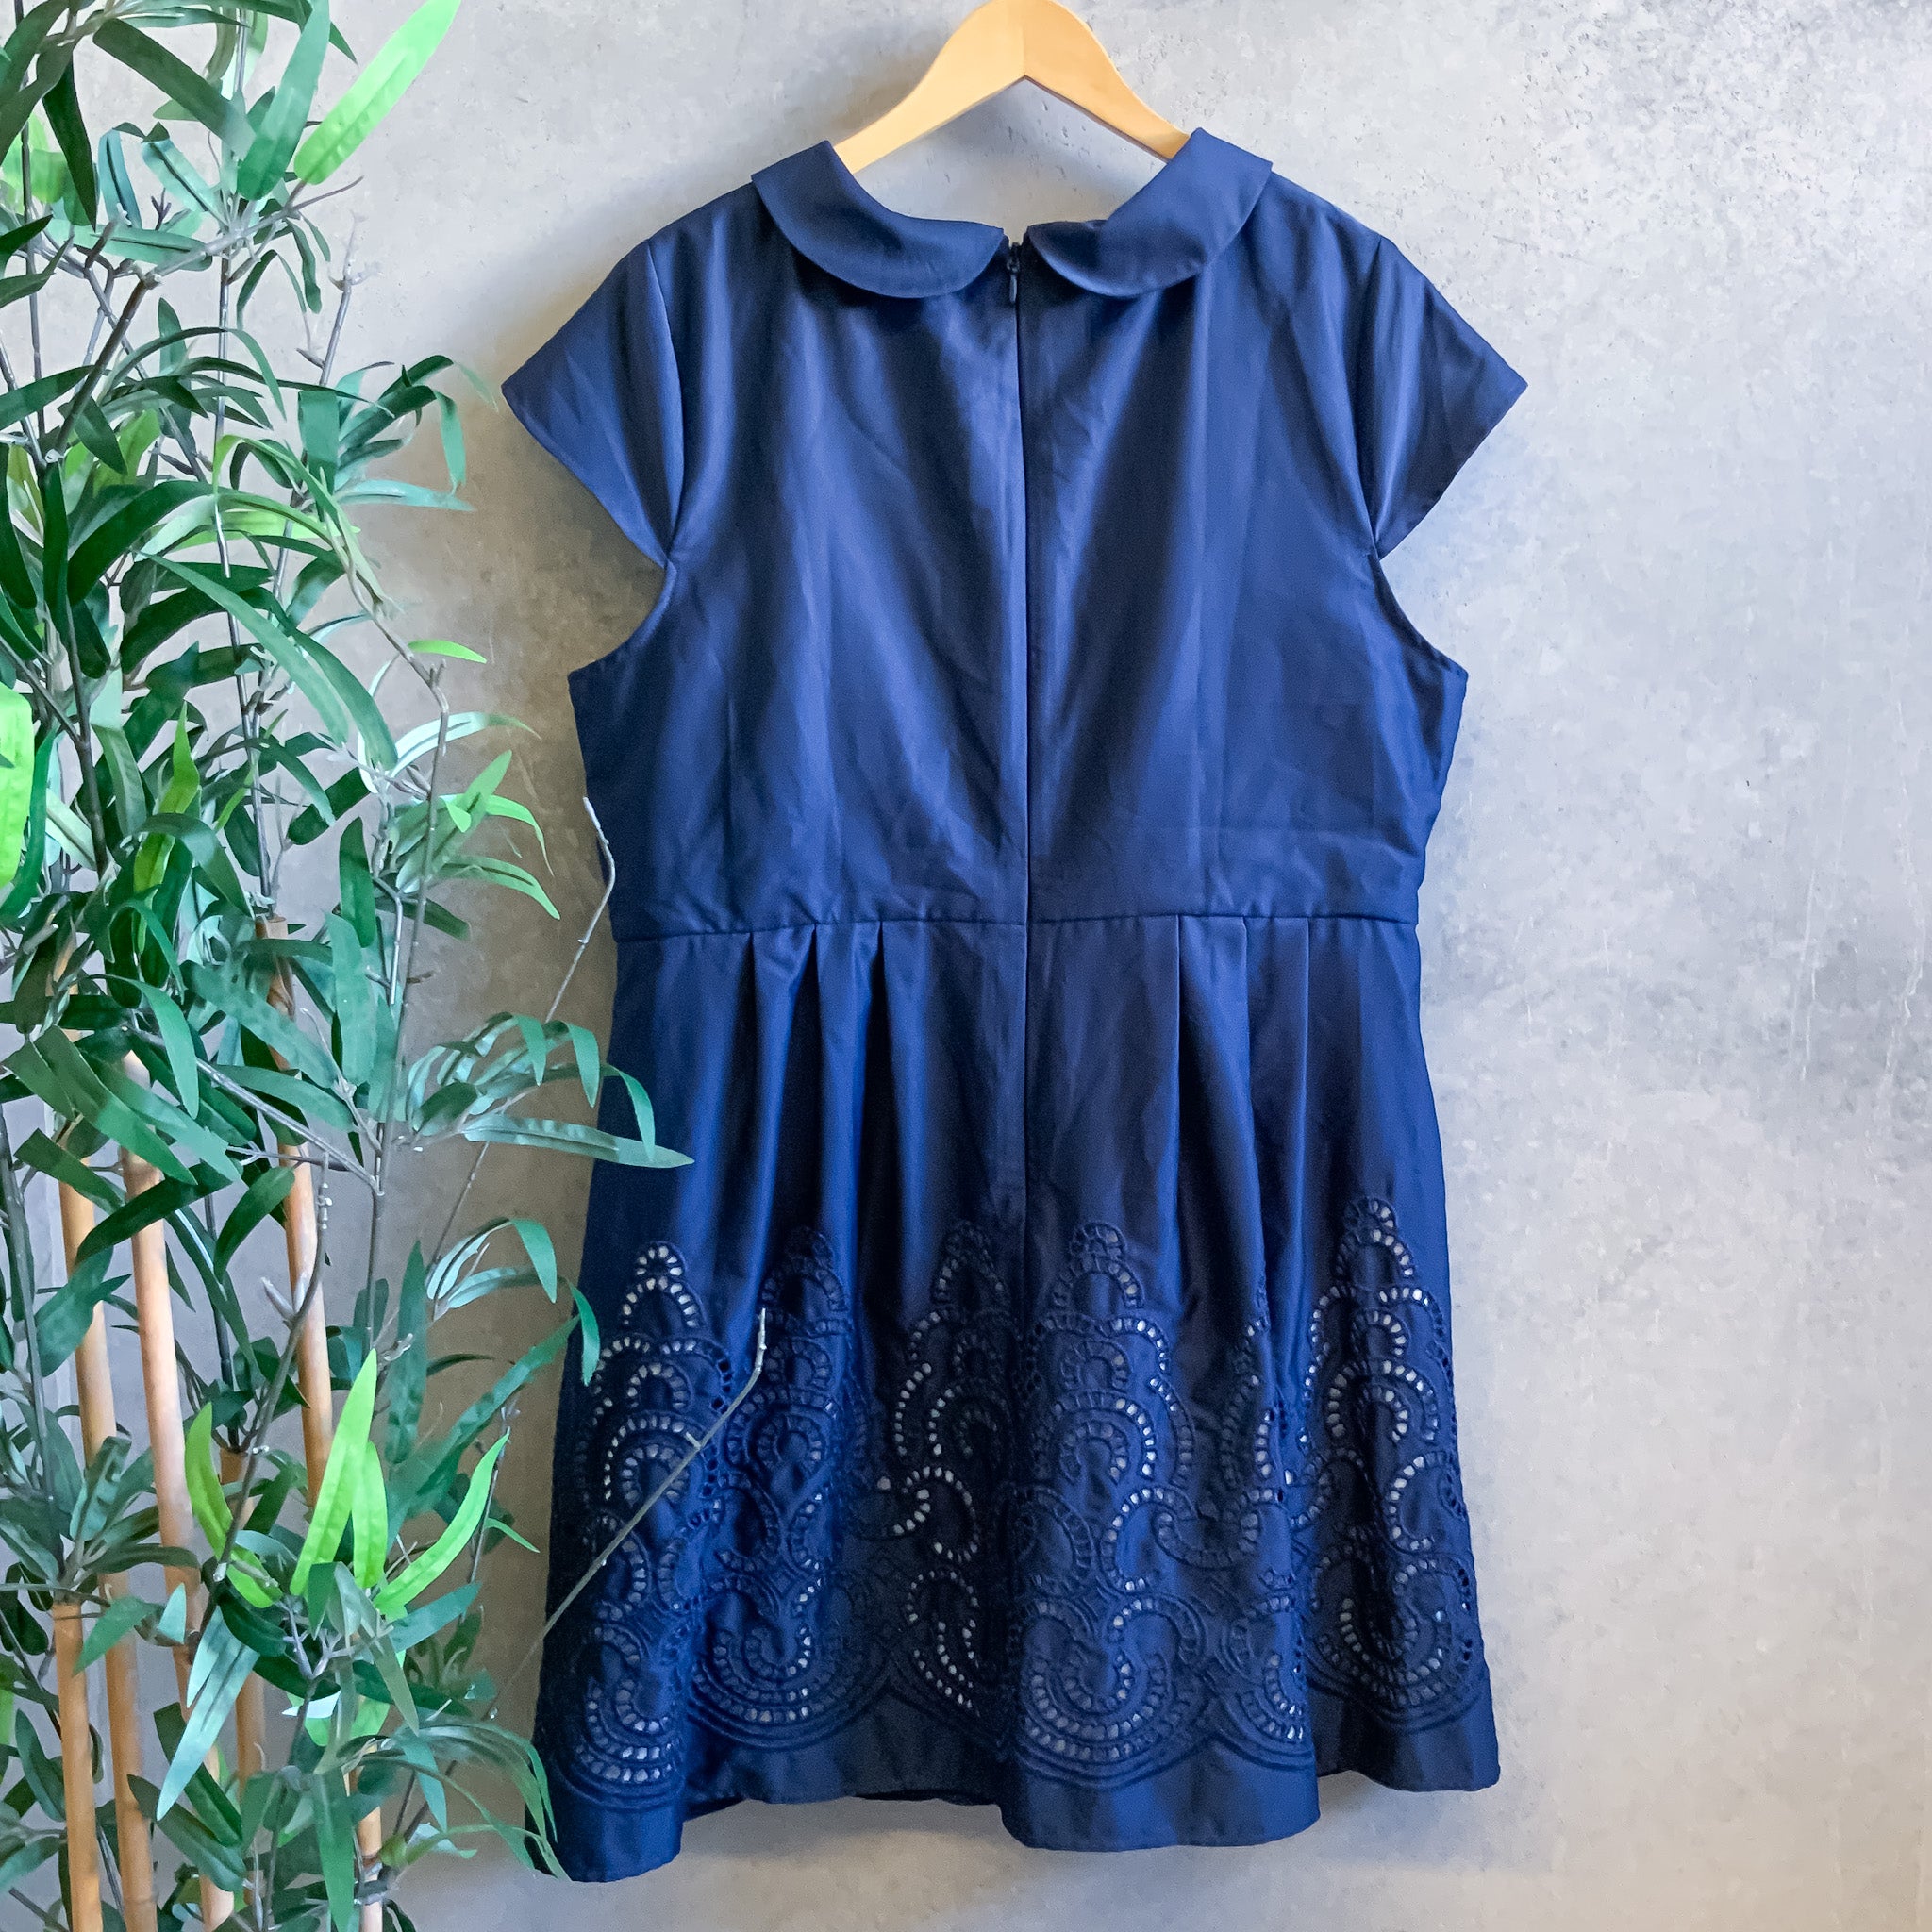 CHI CHI Blue Laser Cut Collared Fit & Flare Paty Dress - Size 22